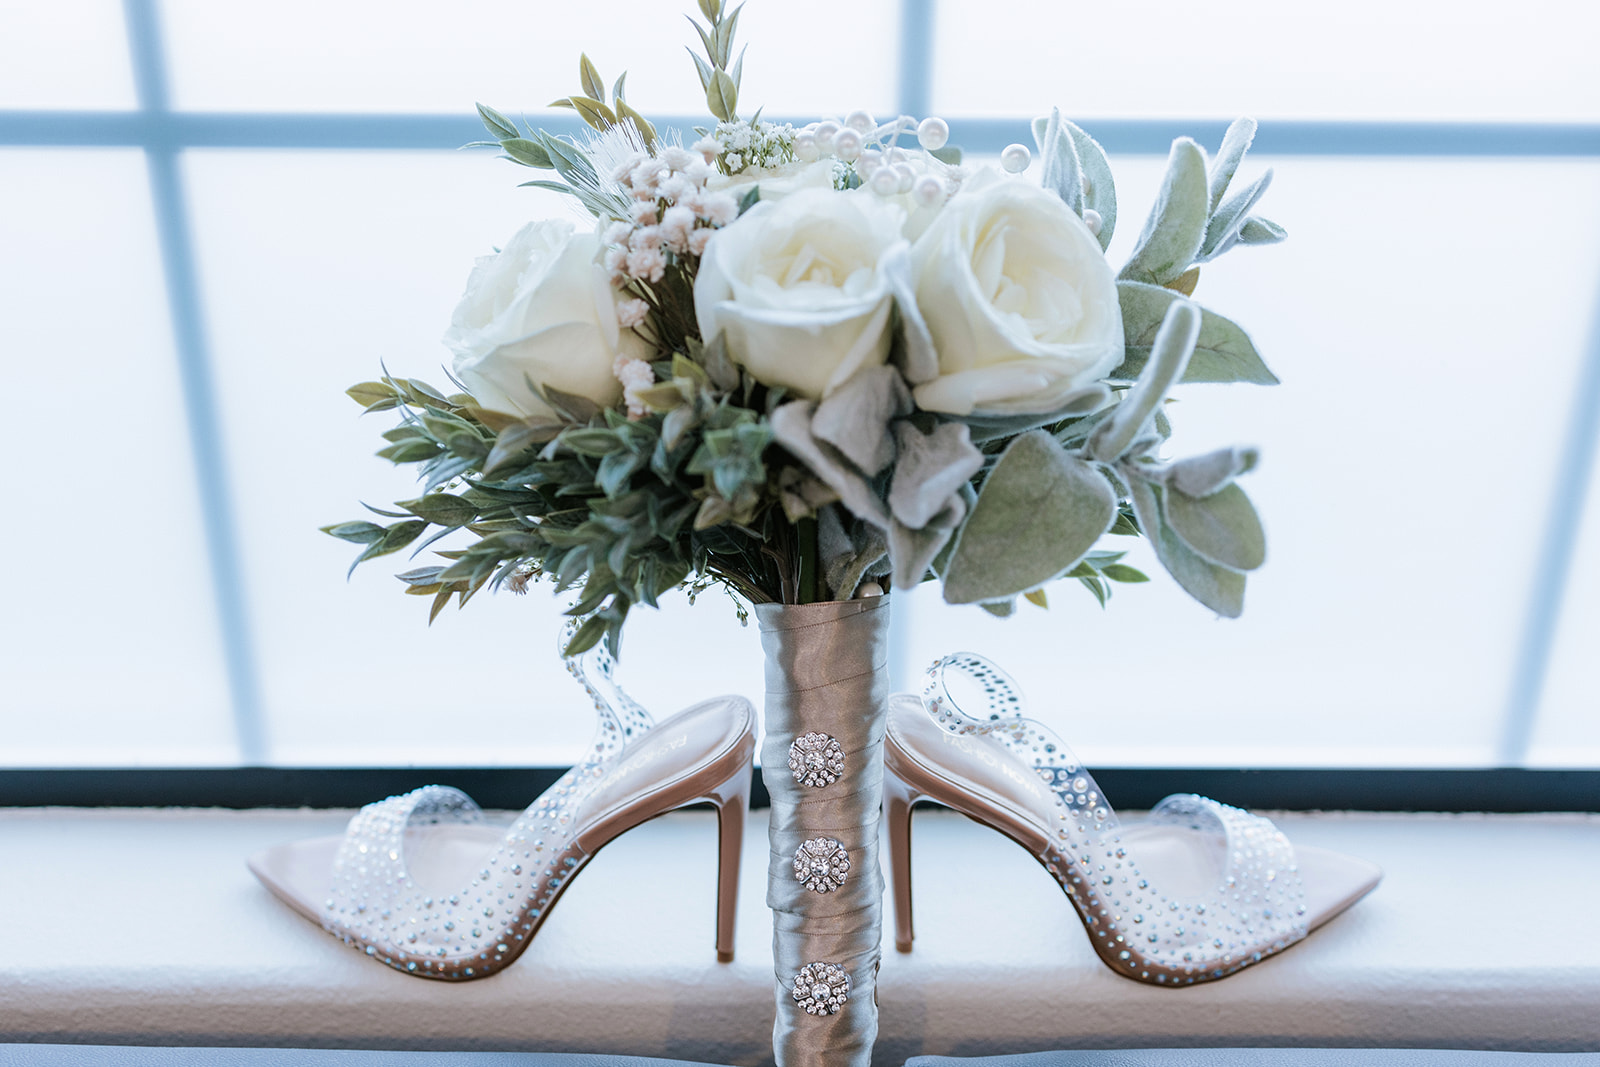 Brides Shoes and flowers, White Flowers for the Bouquet 